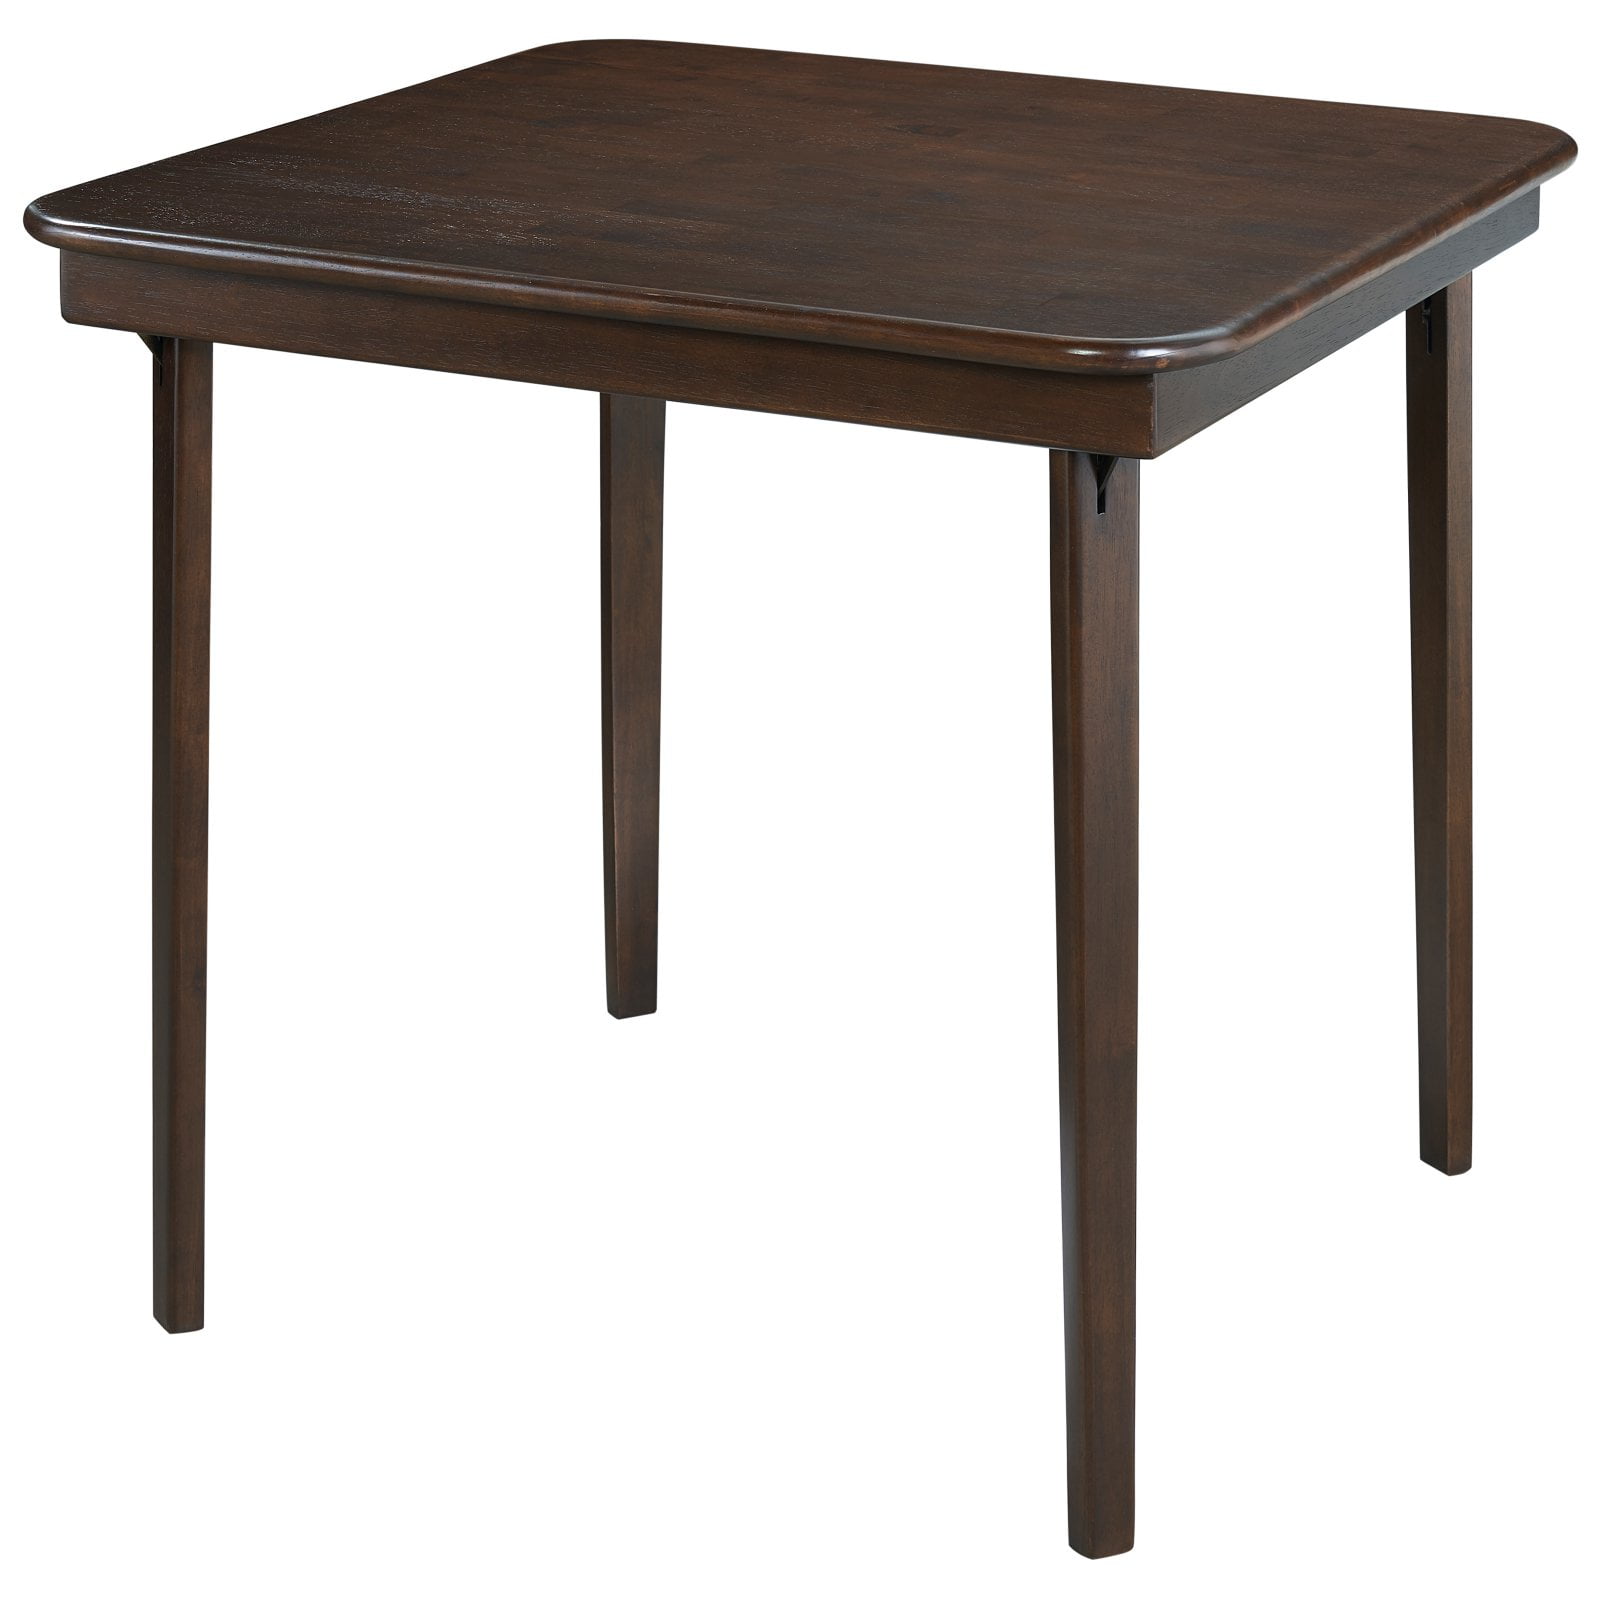 Stakmore Straight Edge Folding Dining Table